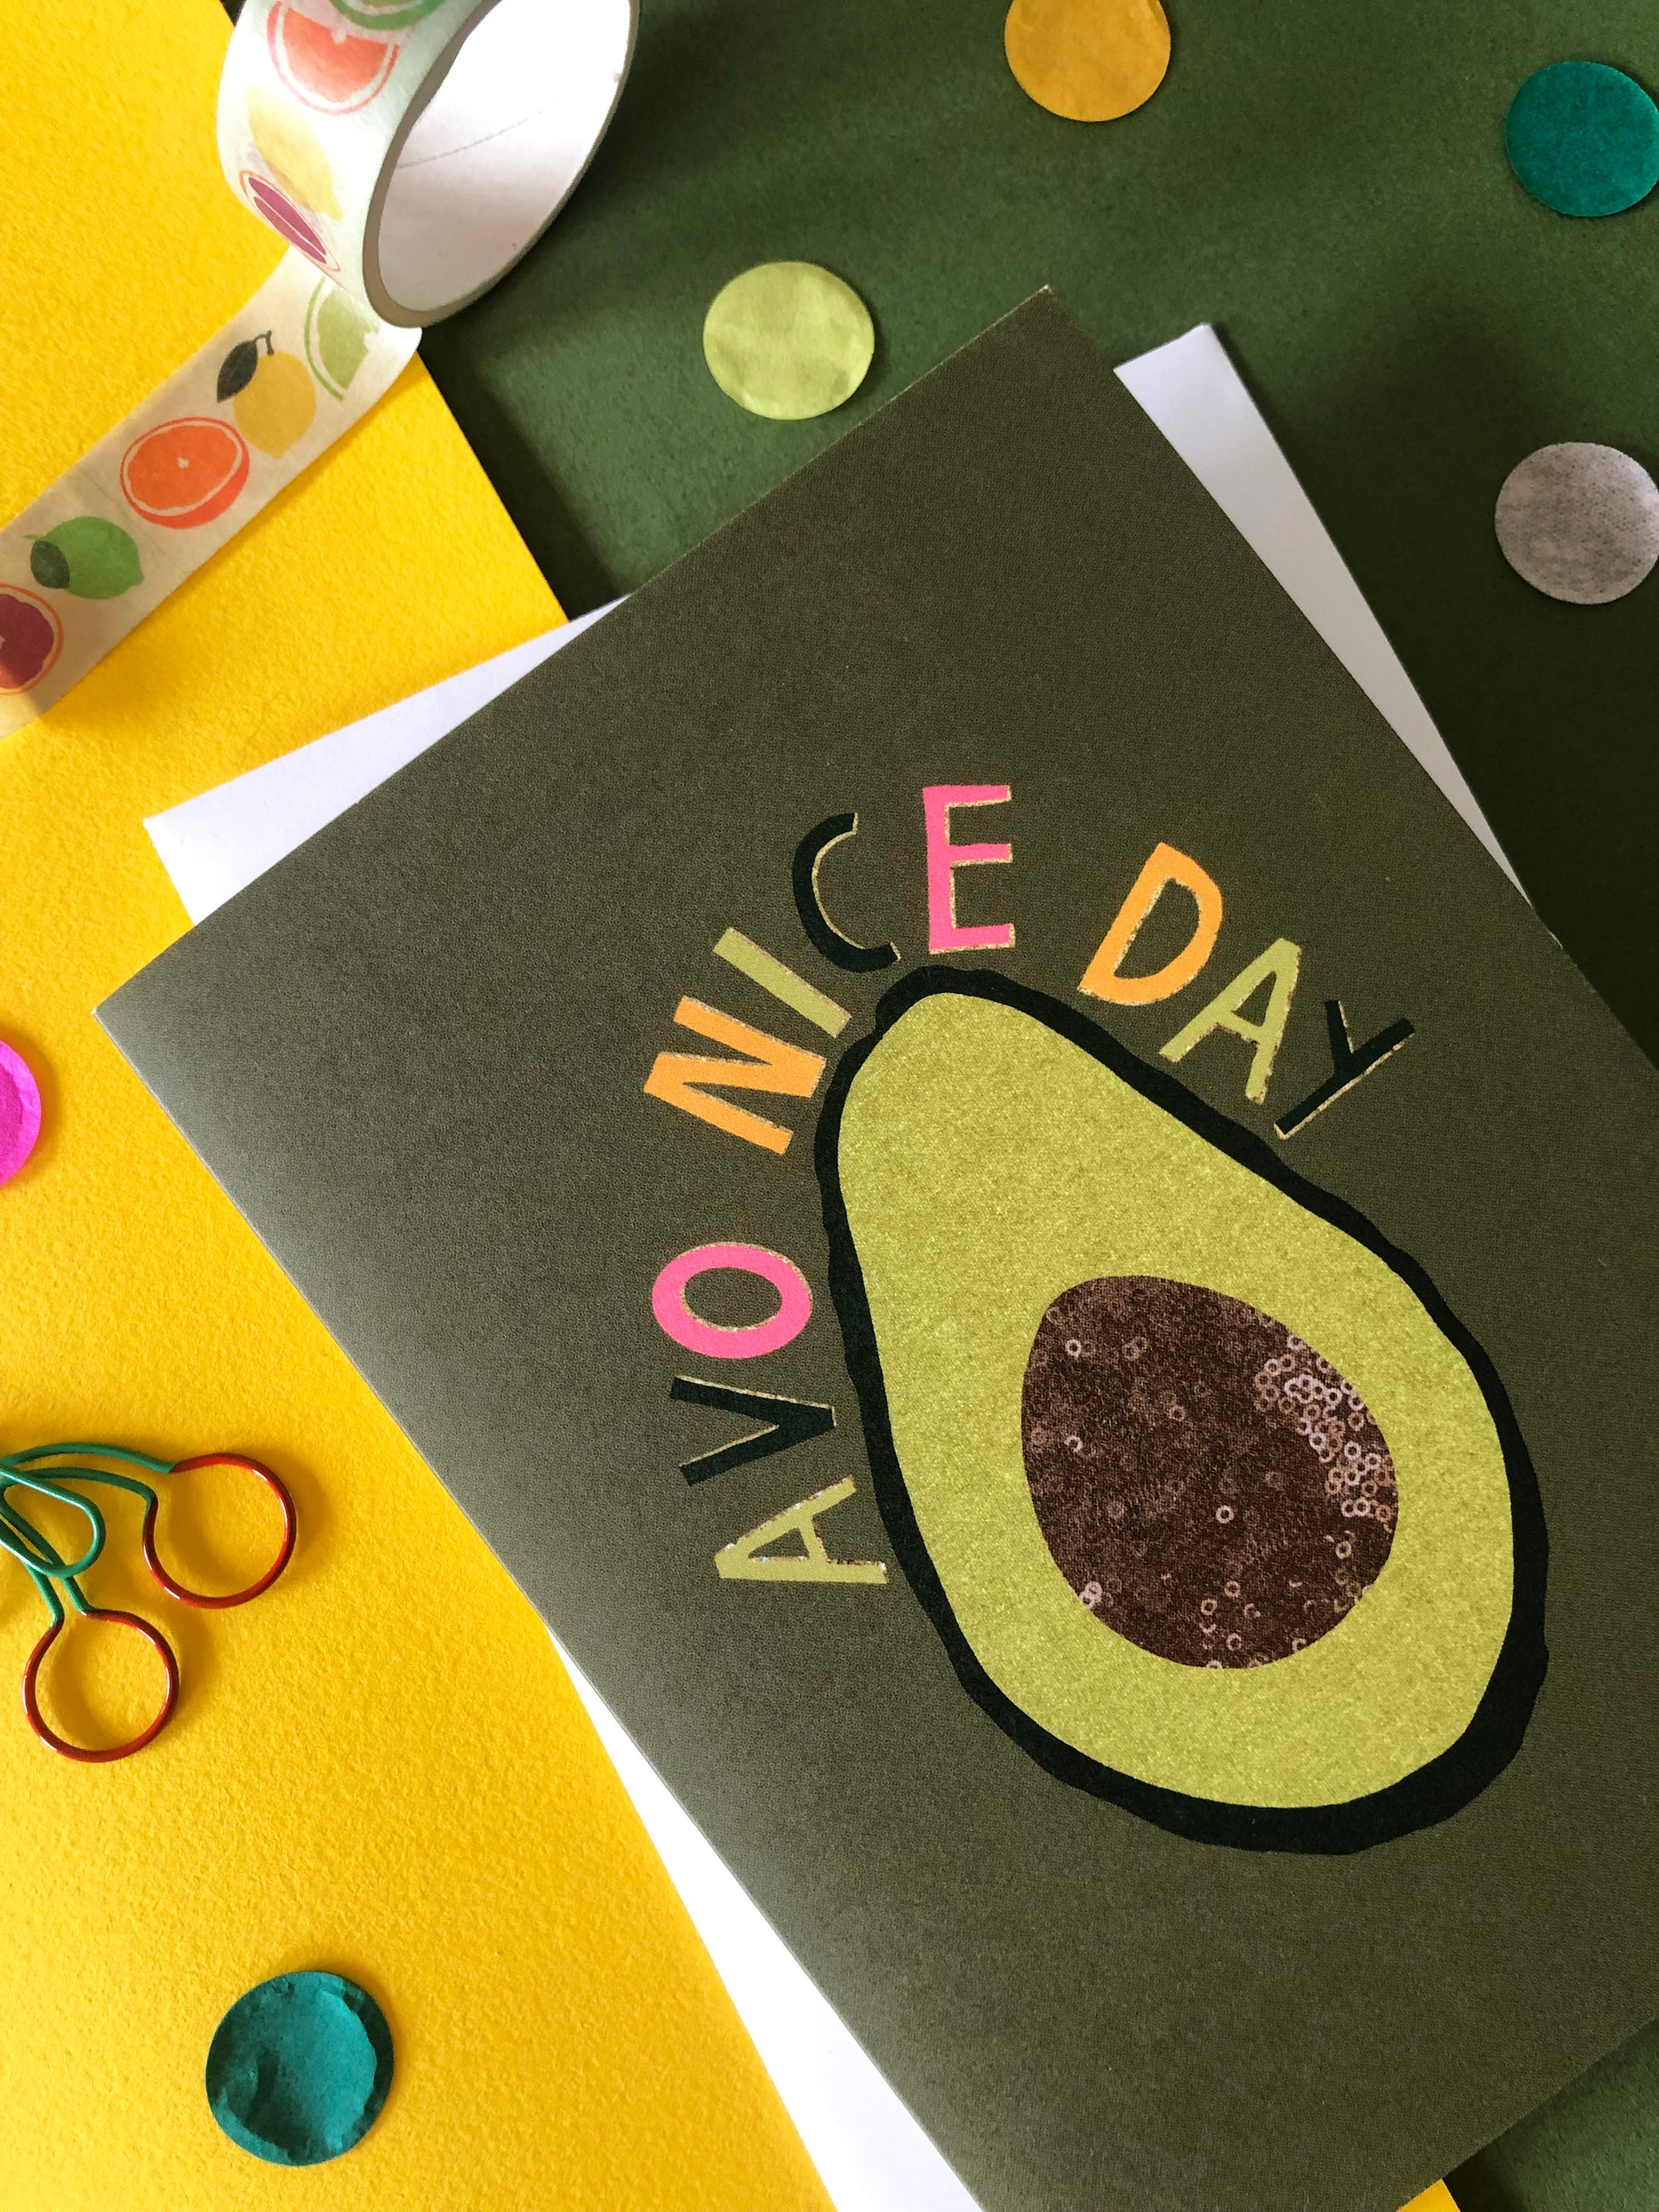 Green "everyday" greetings card that says 'avo nice day' and features an illustration of an avocado